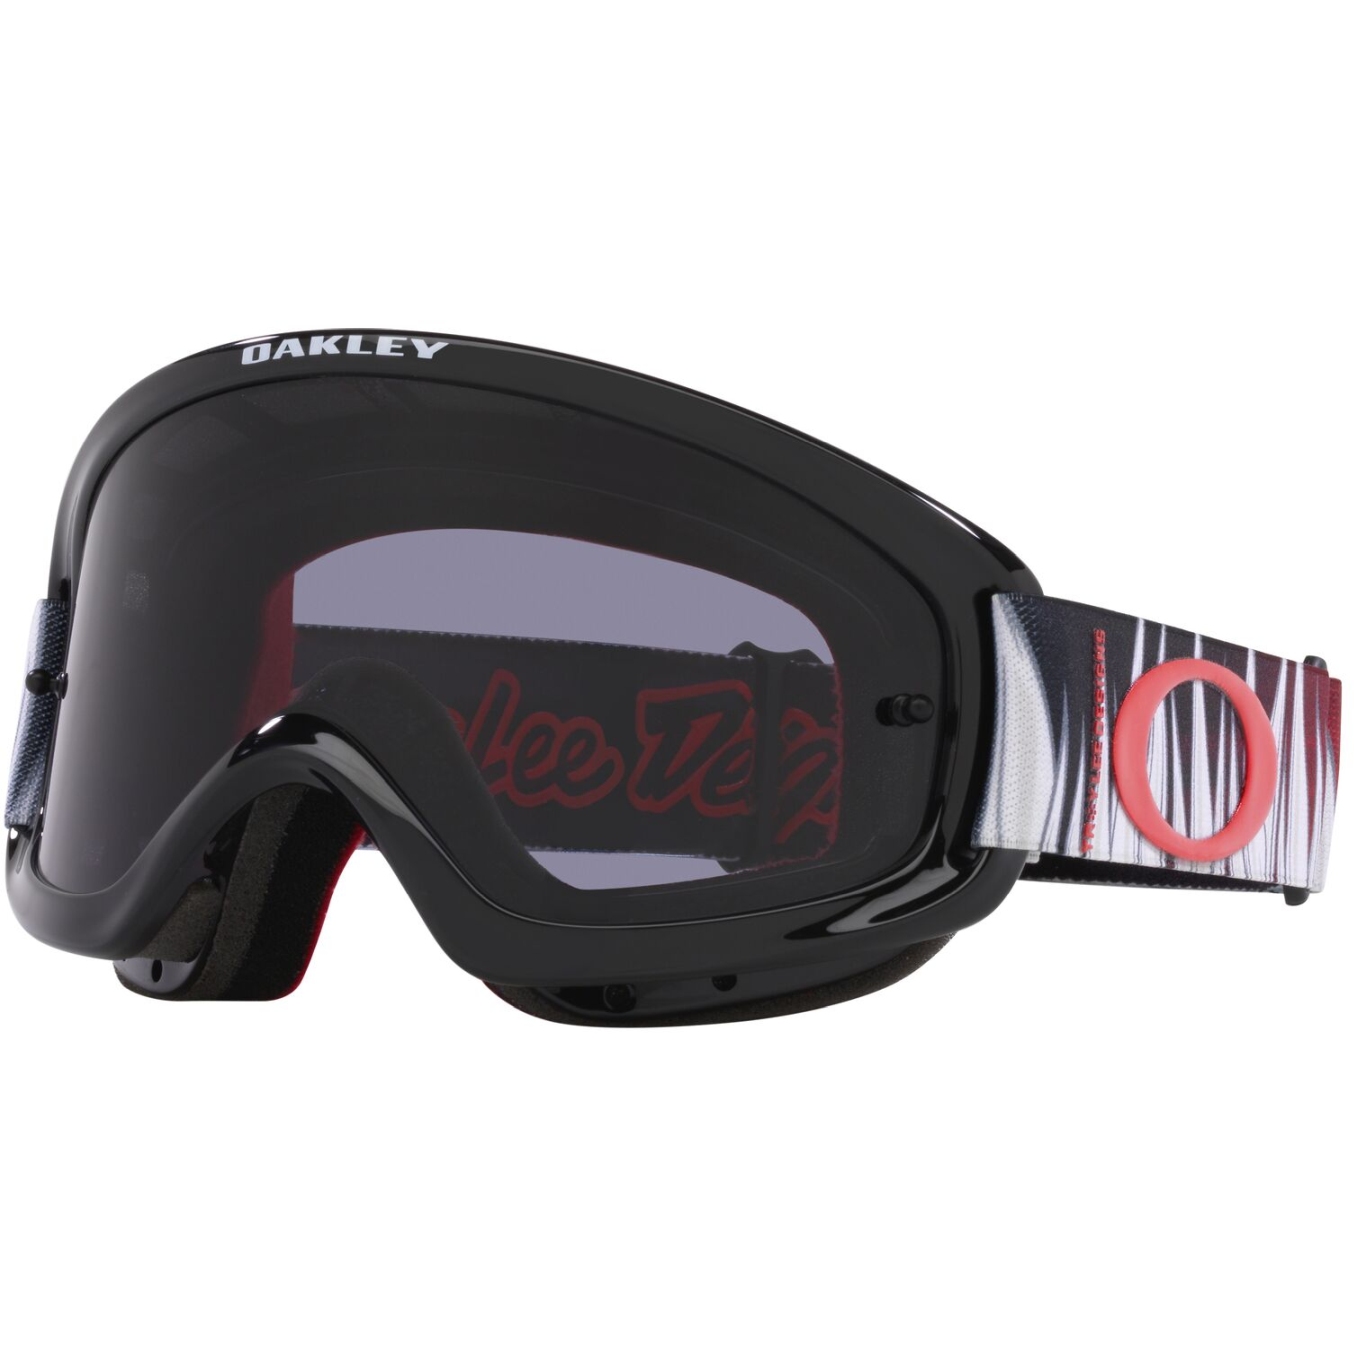 Picture of Oakley O-Frame 2.0 PRO XS MX Goggle - Troy Lee Designs Bite/Dark Grey - OO7116-21